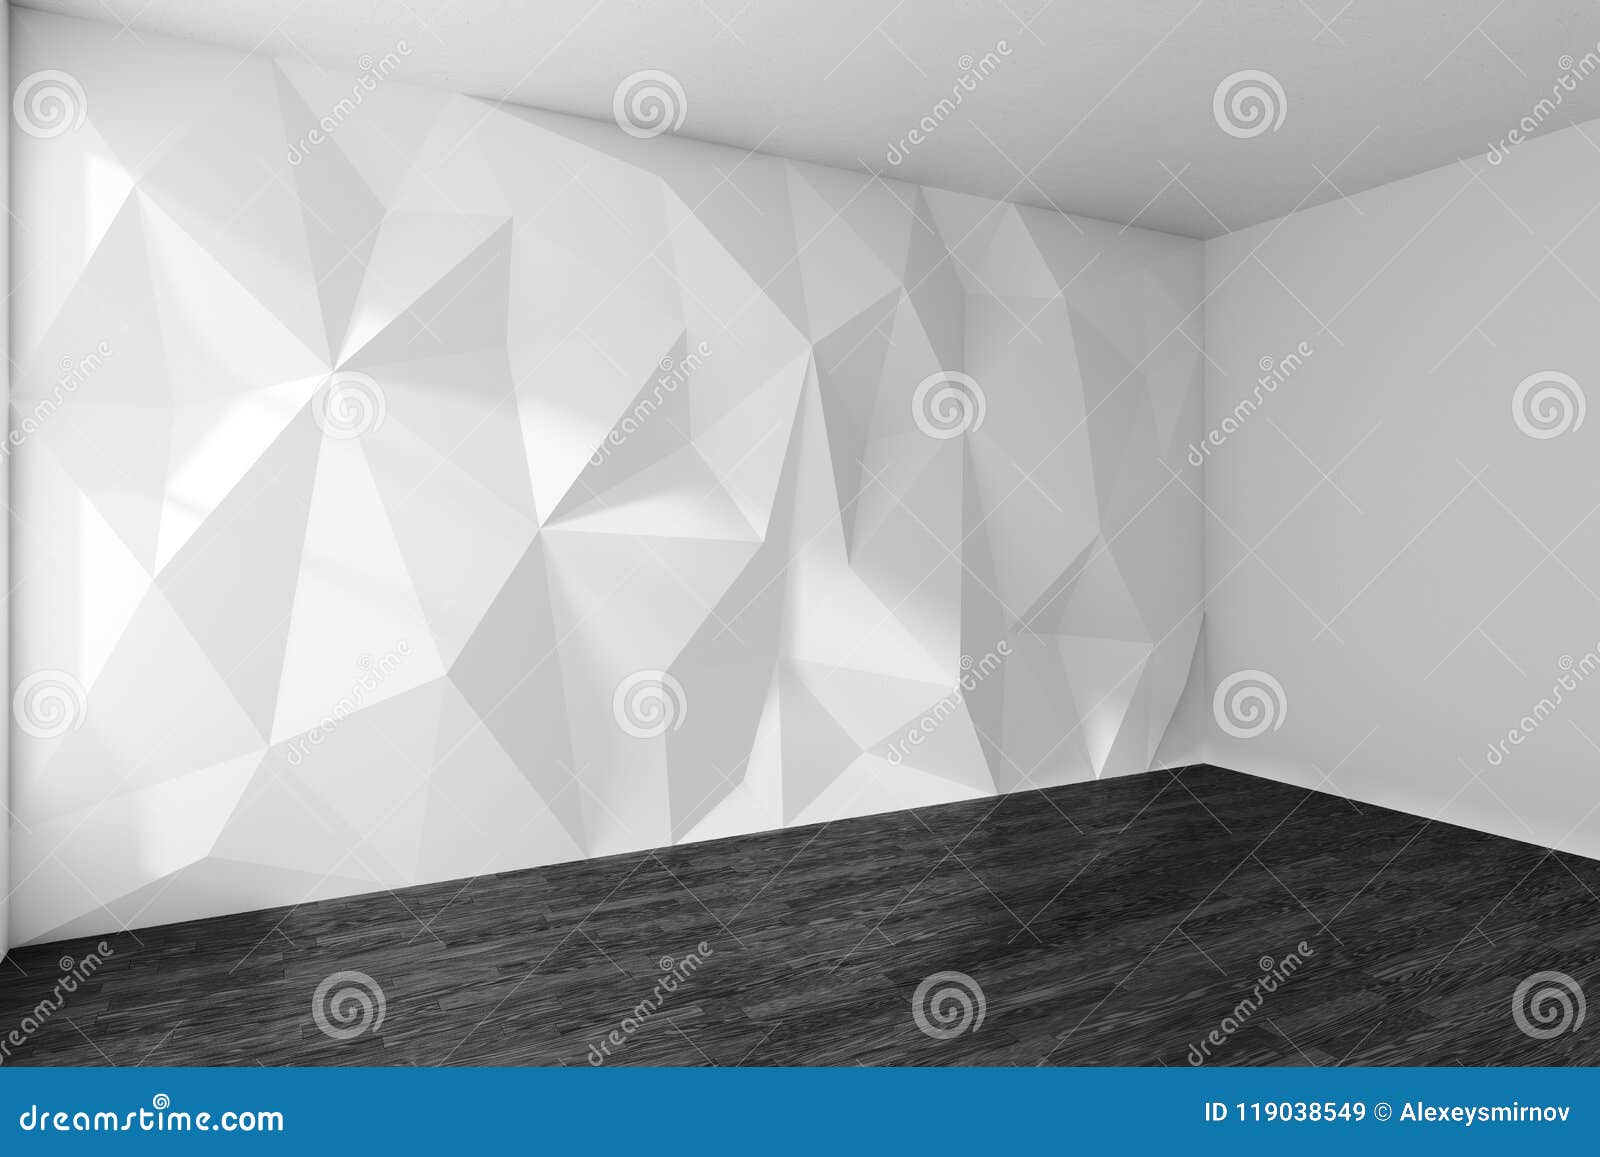 White Room Corner With Rumpled Wall And Black Parquet Floor Stock